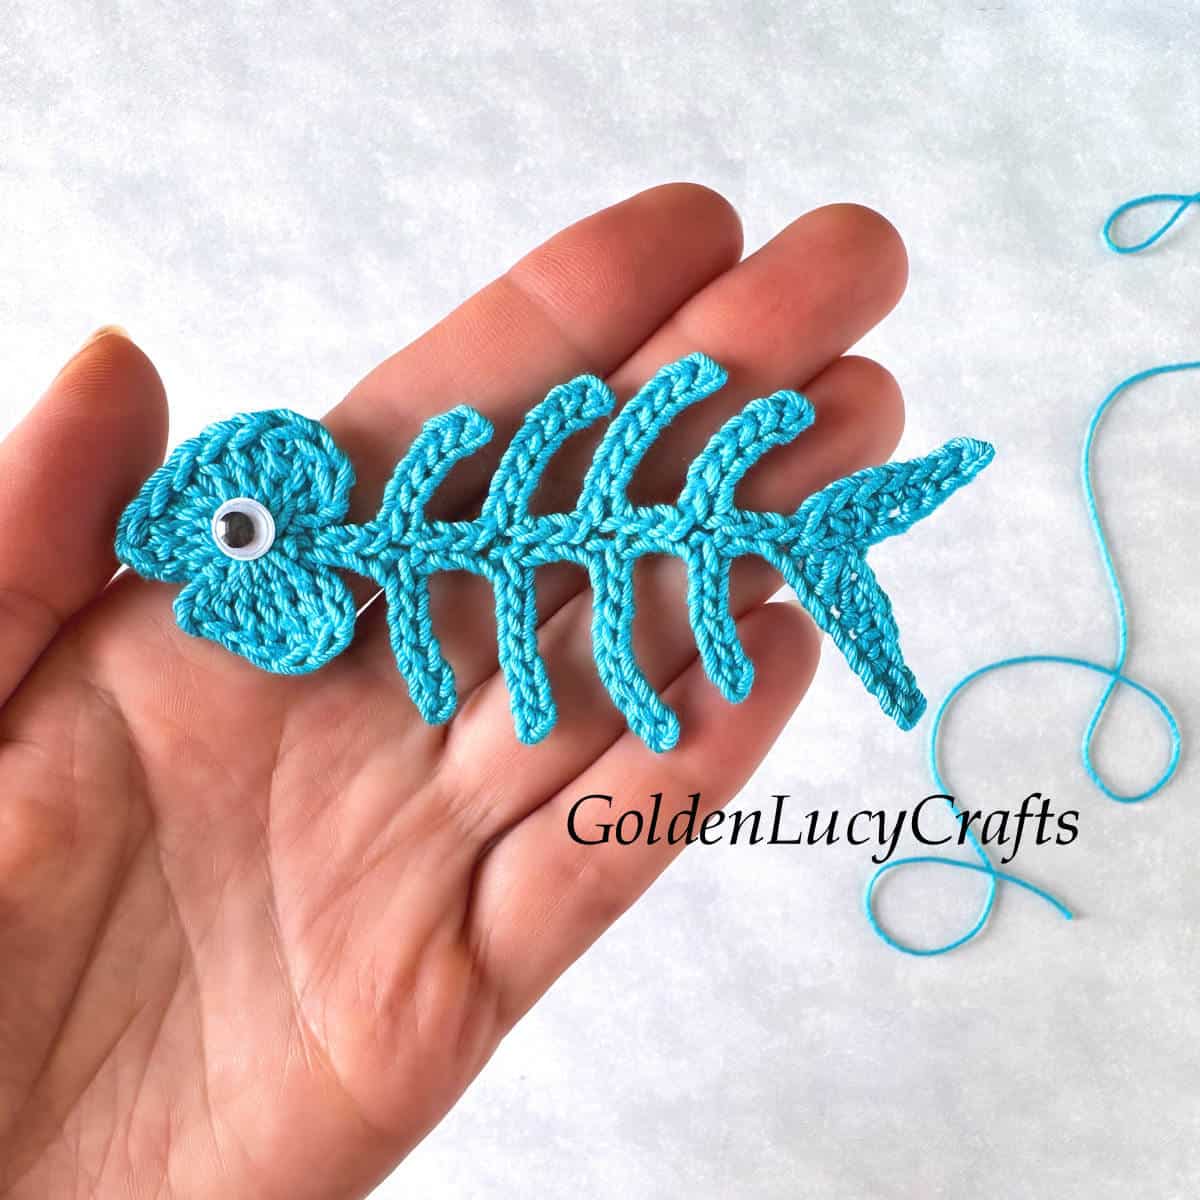 Fishbone crochet applique in the palm of a hand.